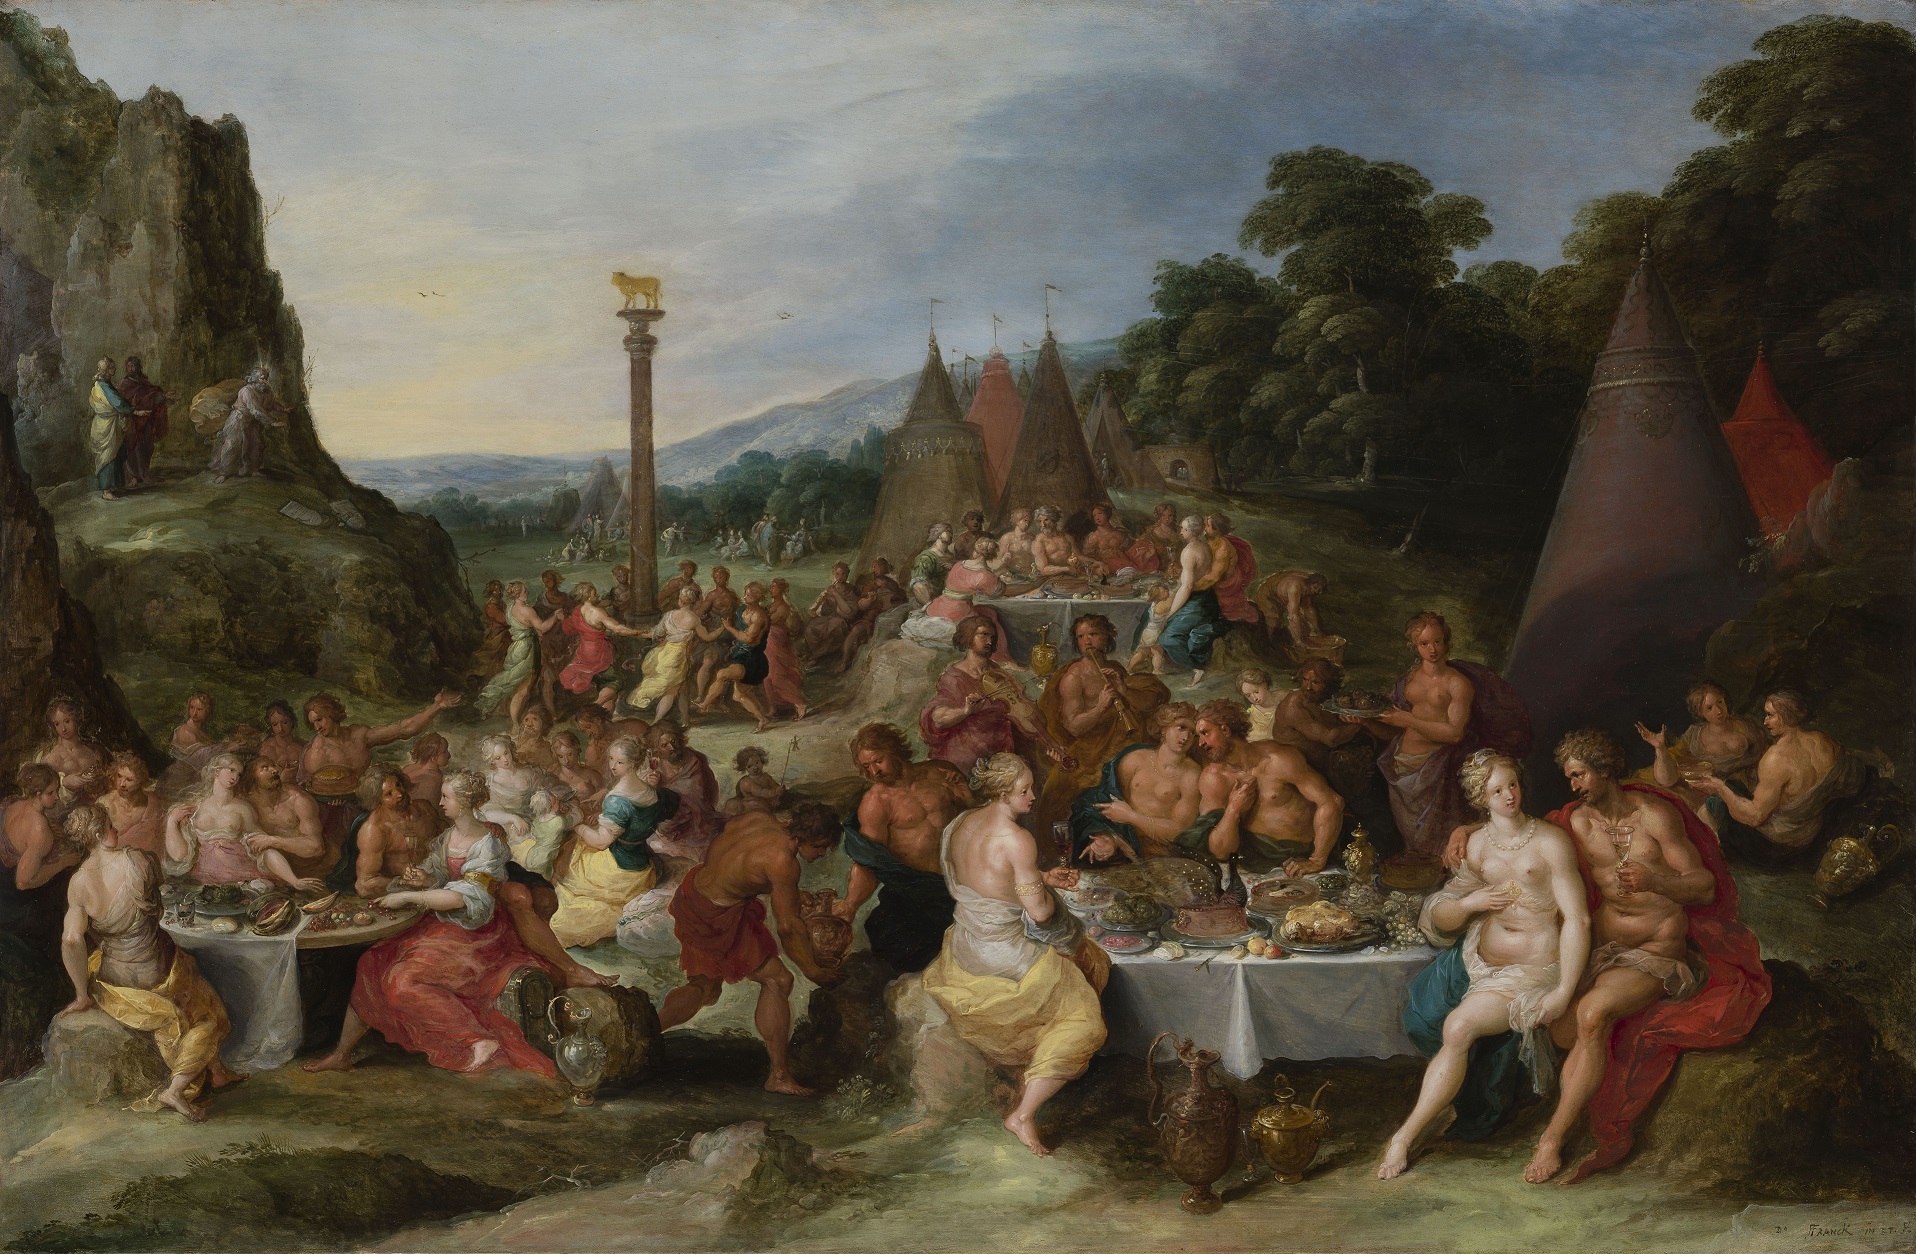 Worship of the Golden Calf by Frans Francken the Younger c.1630-35, oil on panel. The theme of abundance is central to this painting and others which inspired the exhibition’s historical recreation of a Baroque feasting table.